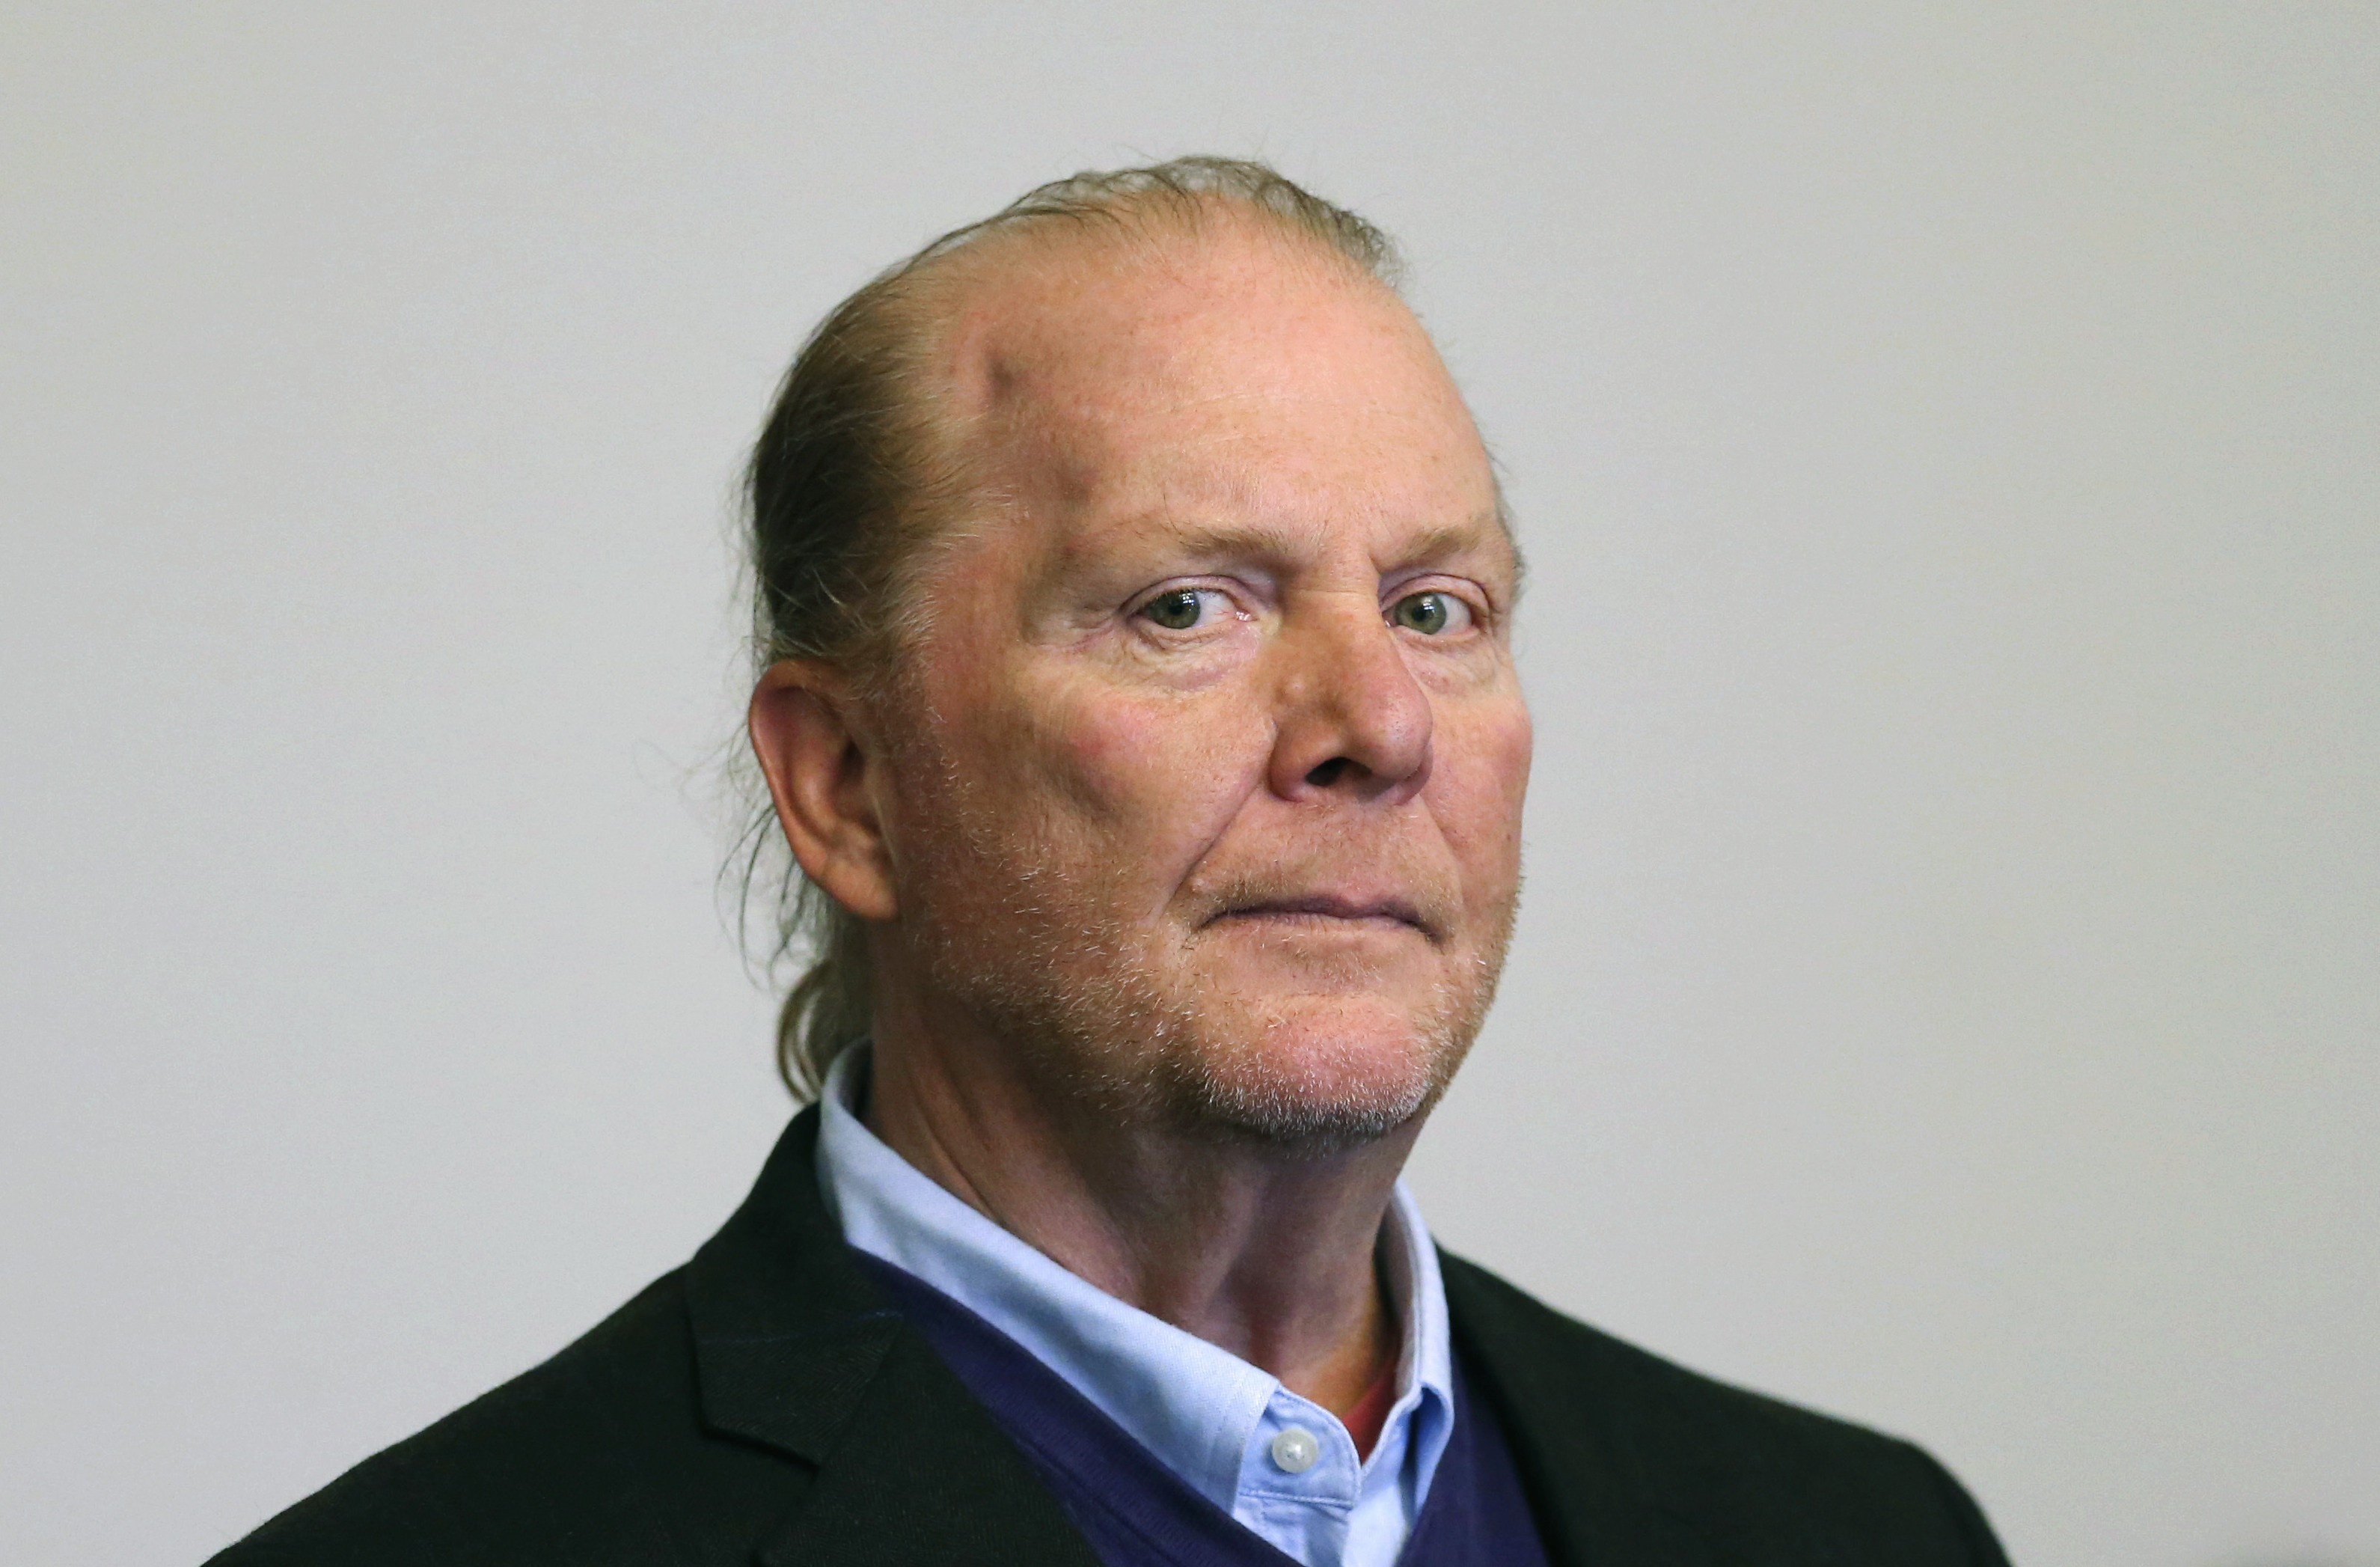 Celebrity chef Mario Batali is charged with indecent assault and battery. Photo: AP